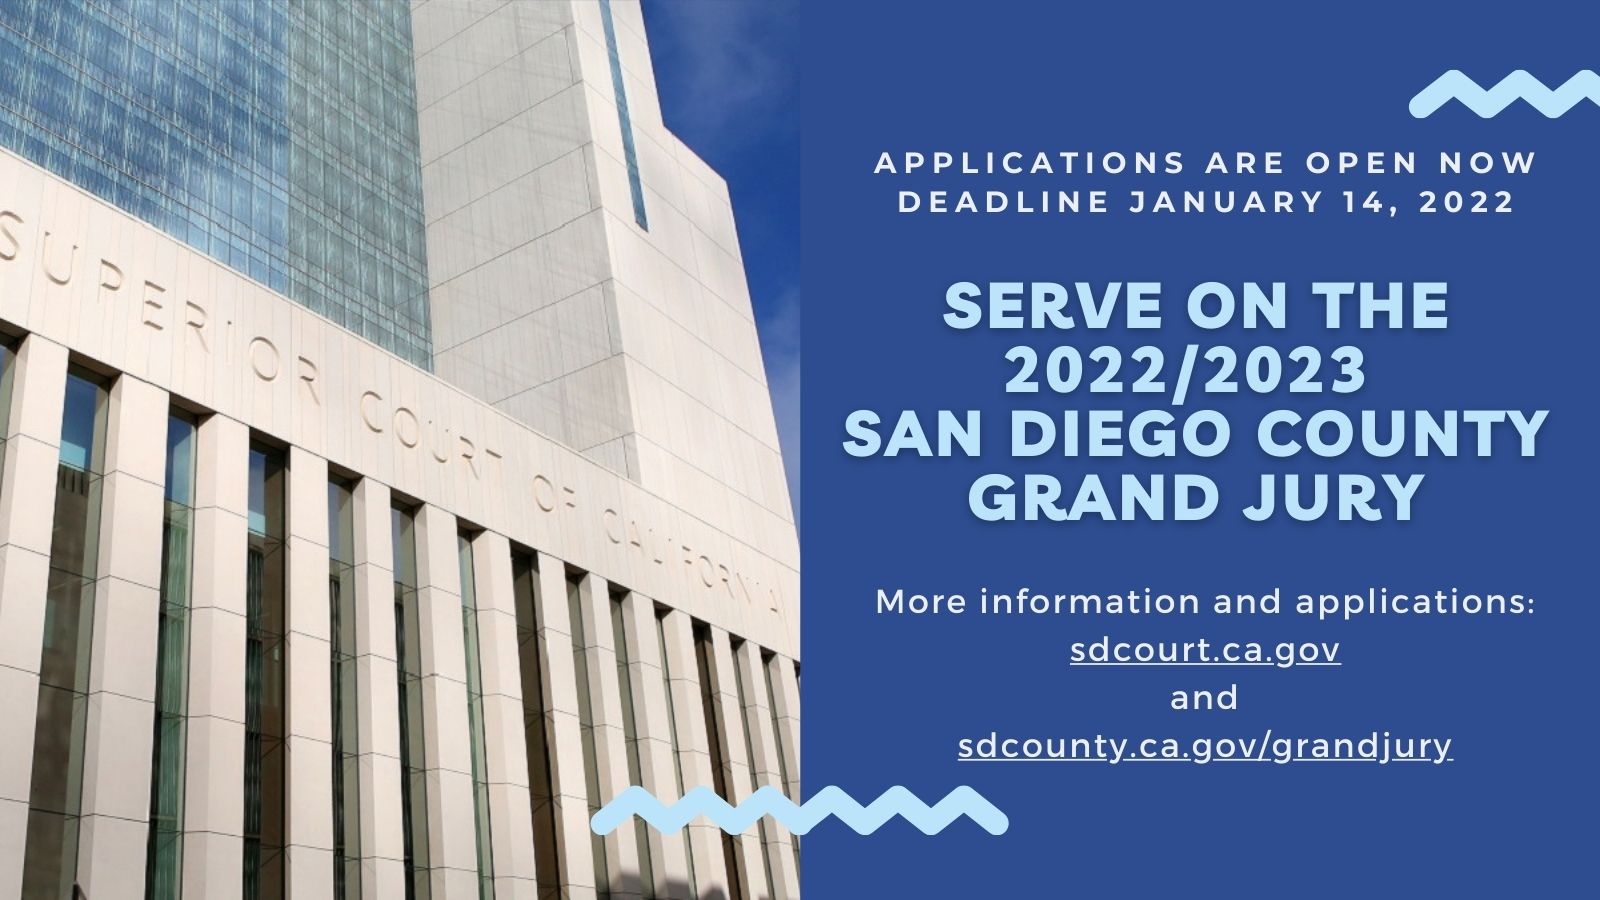 San Diego County Grand Jury Looking for New Applicants Superior Court